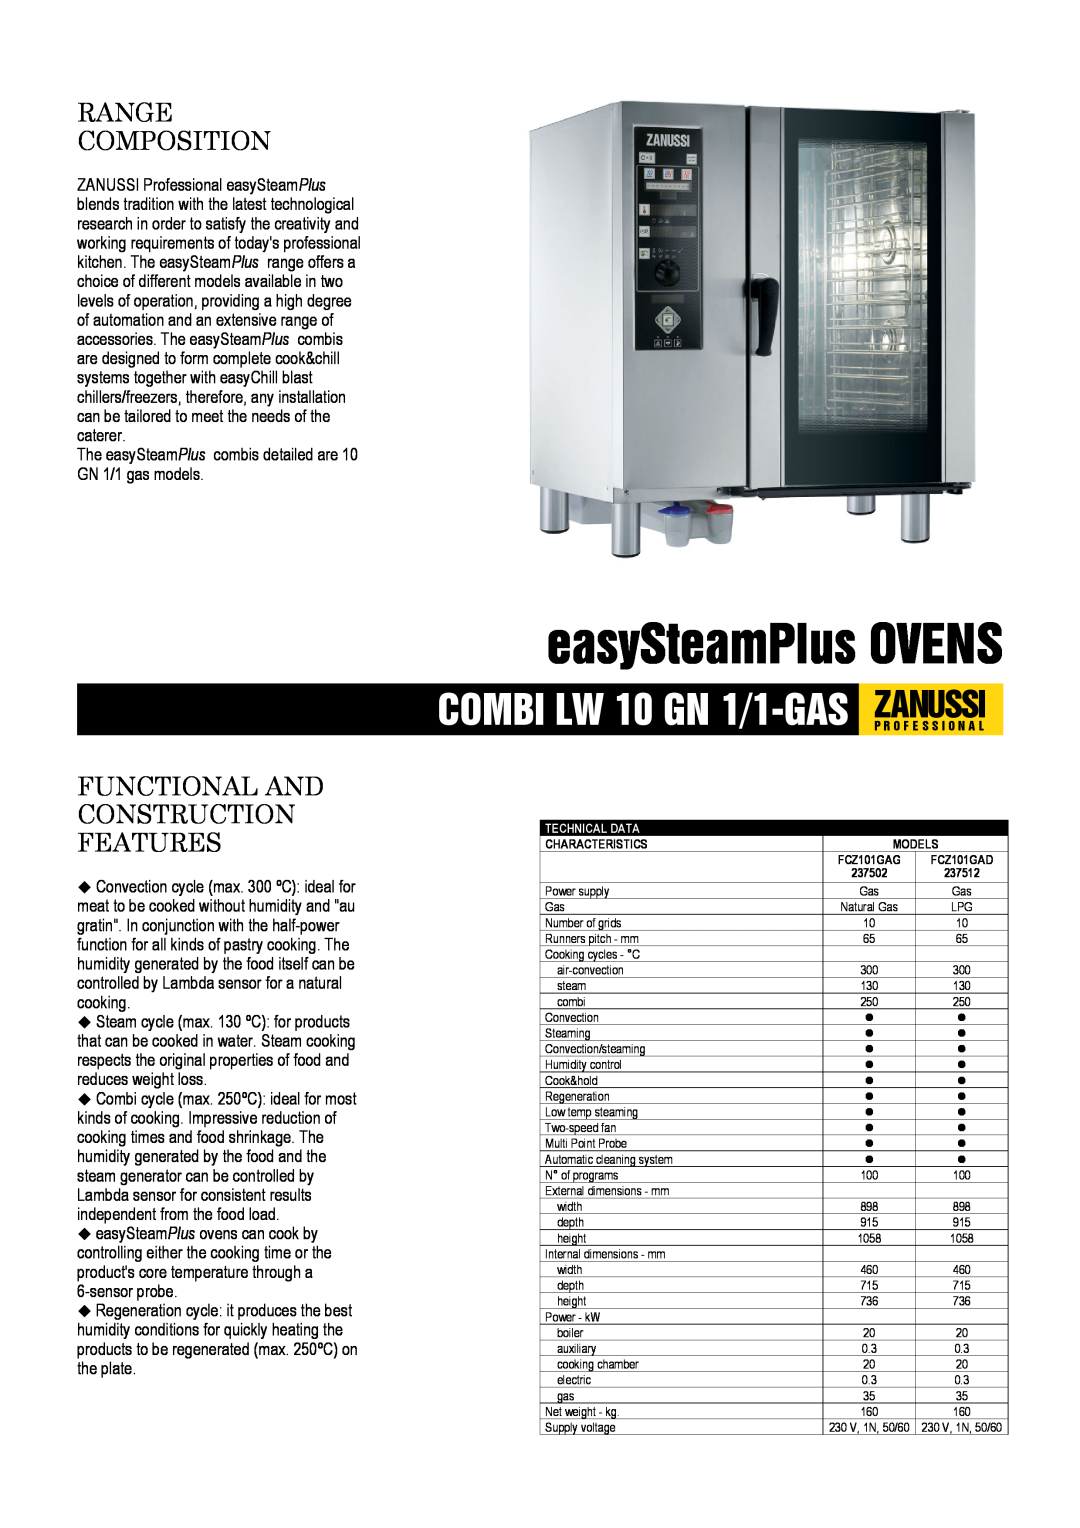 Zanussi FCZ101GAG, FCZ101GAD dimensions easySteamPlus OVENS, Range Composition, Functional And Construction Features 